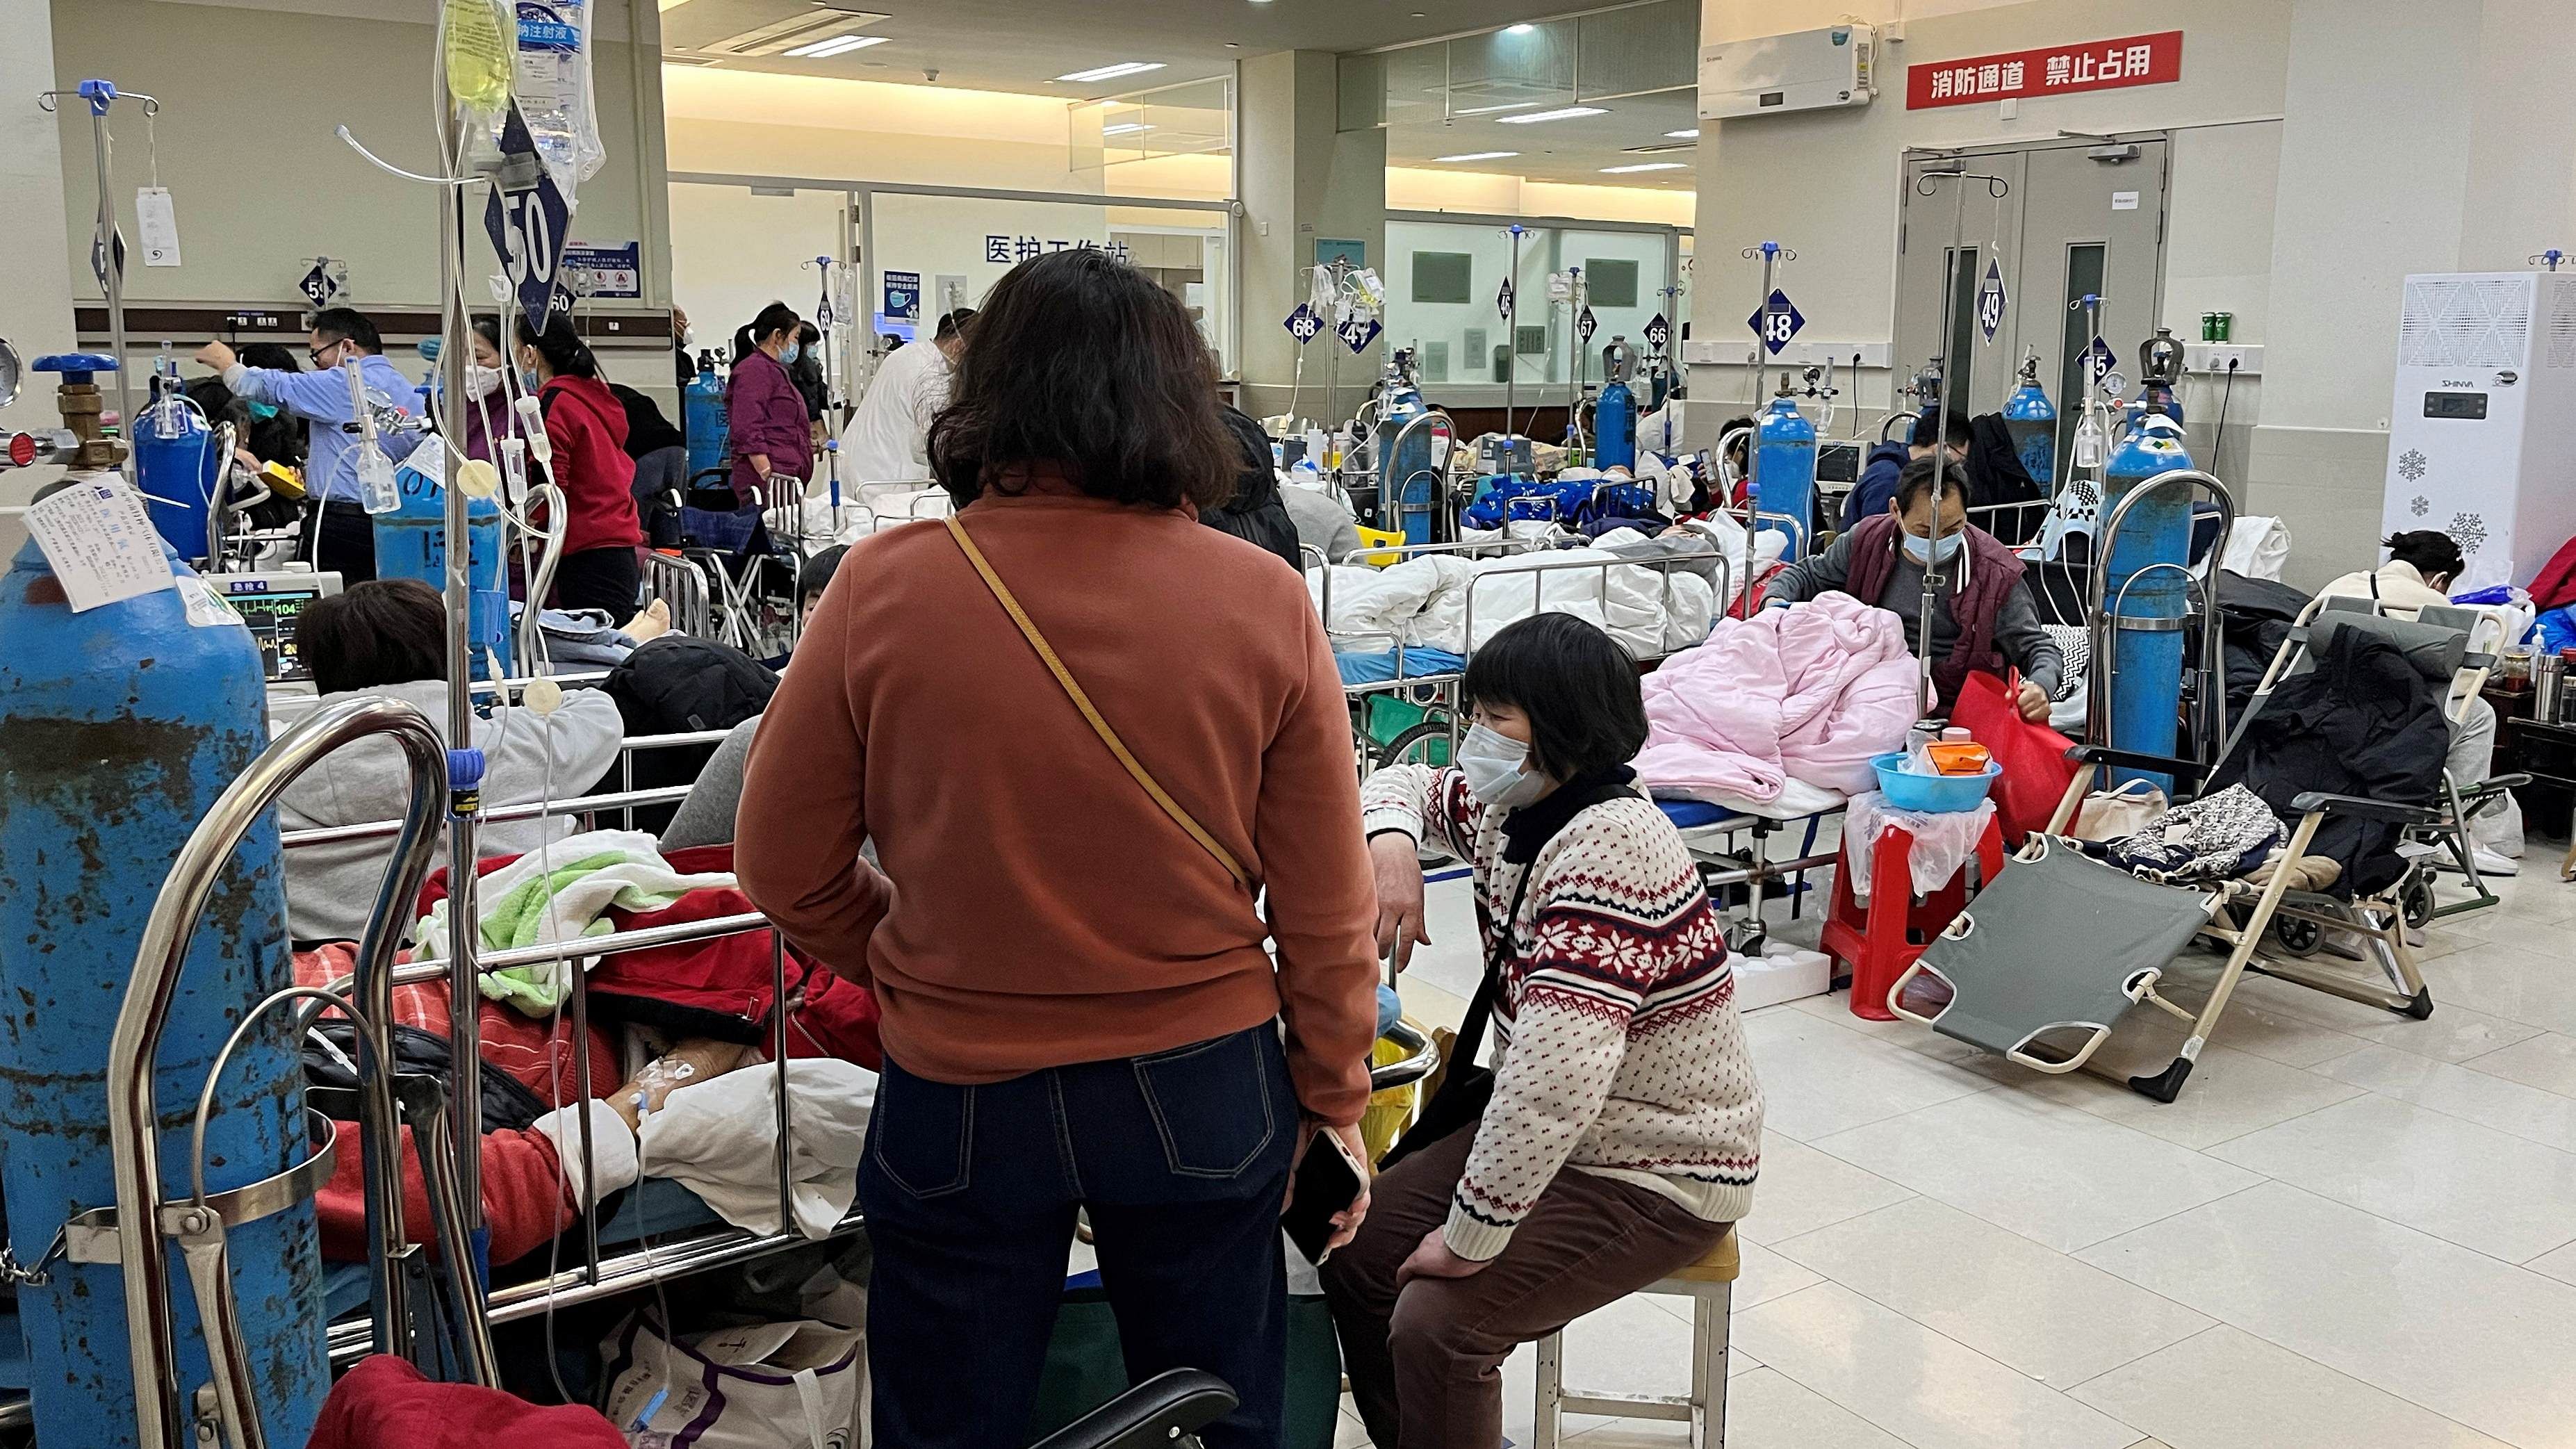 Patients lie on beds at the emergency department of Zhongshan Hospital, amid the coronavirus disease Covid-19 outbreak in Shanghai. Credit: Reuters Photo